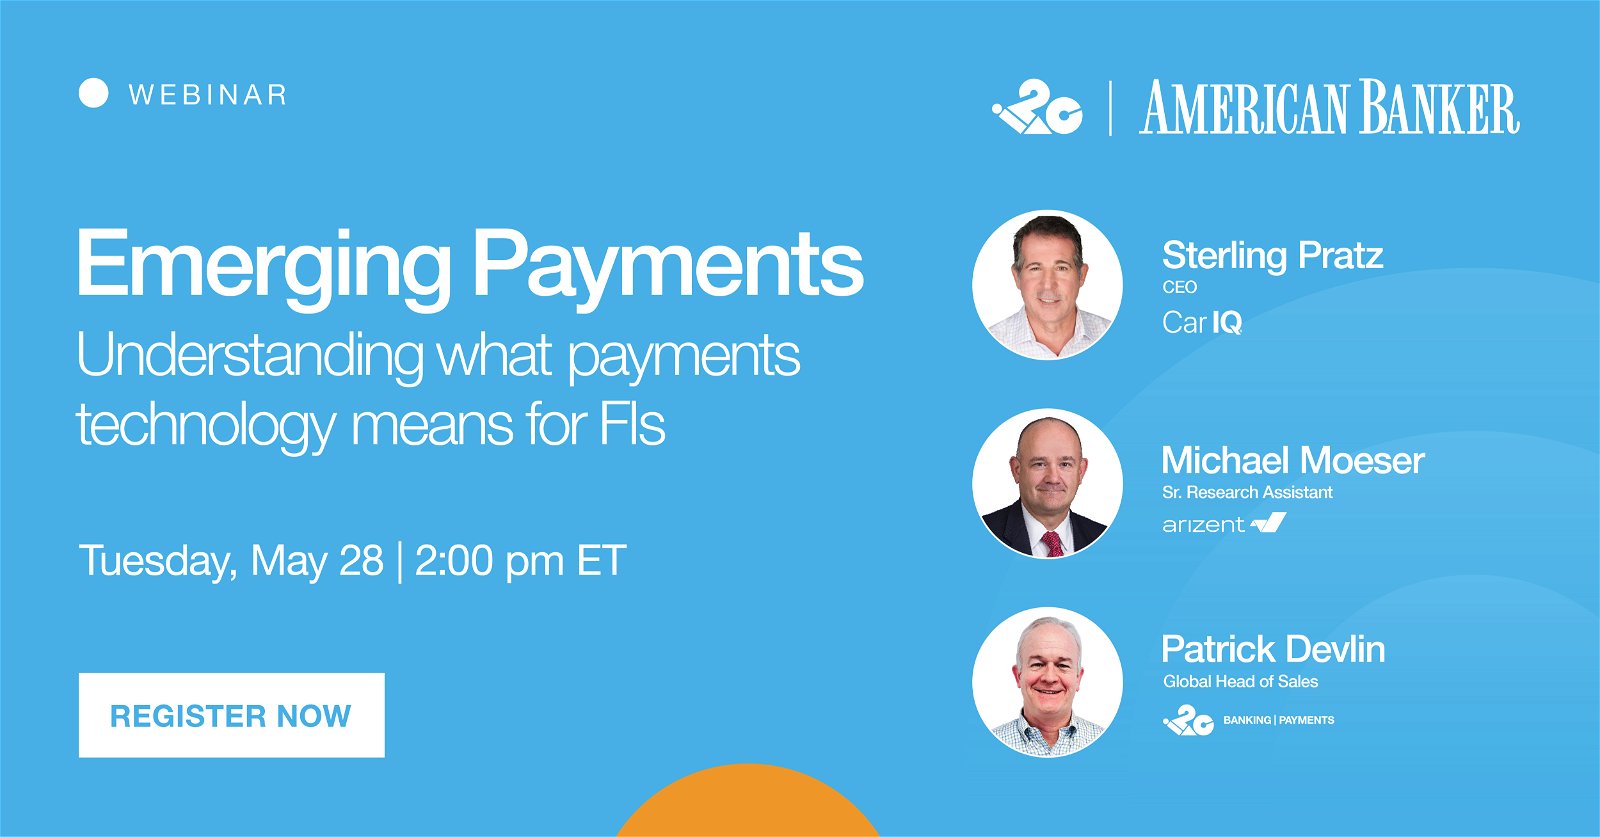 Emerging payments: Understanding what new payments technology means for FIs